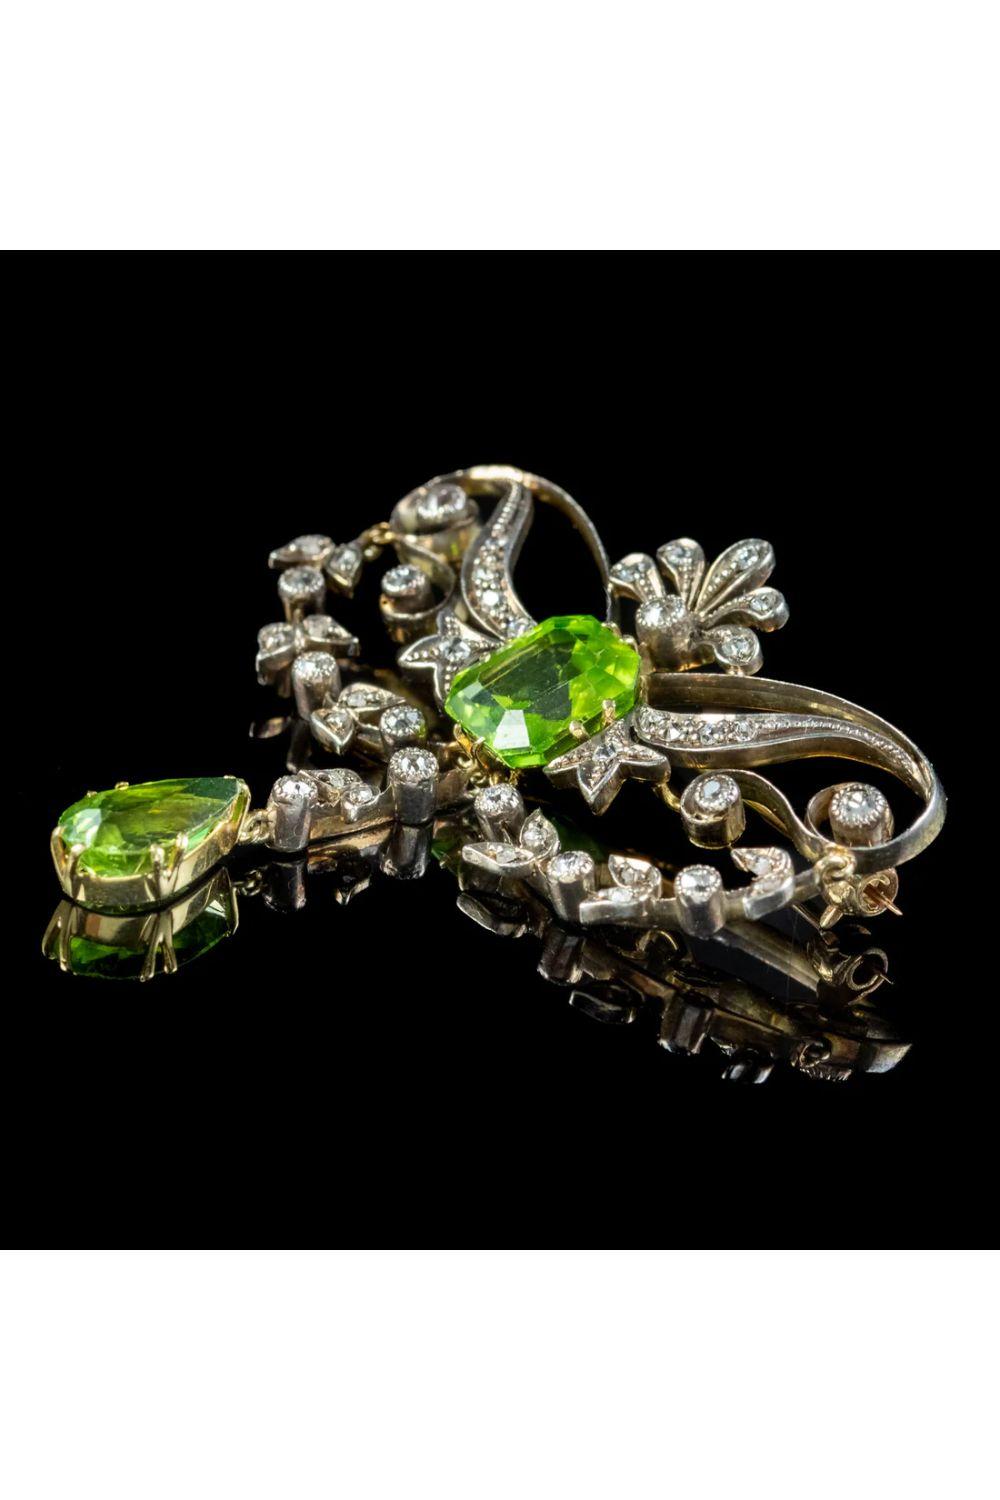 Antique Edwardian Peridot Diamond Brooch in 18 Carat Gold Silver In Good Condition For Sale In Kendal, GB